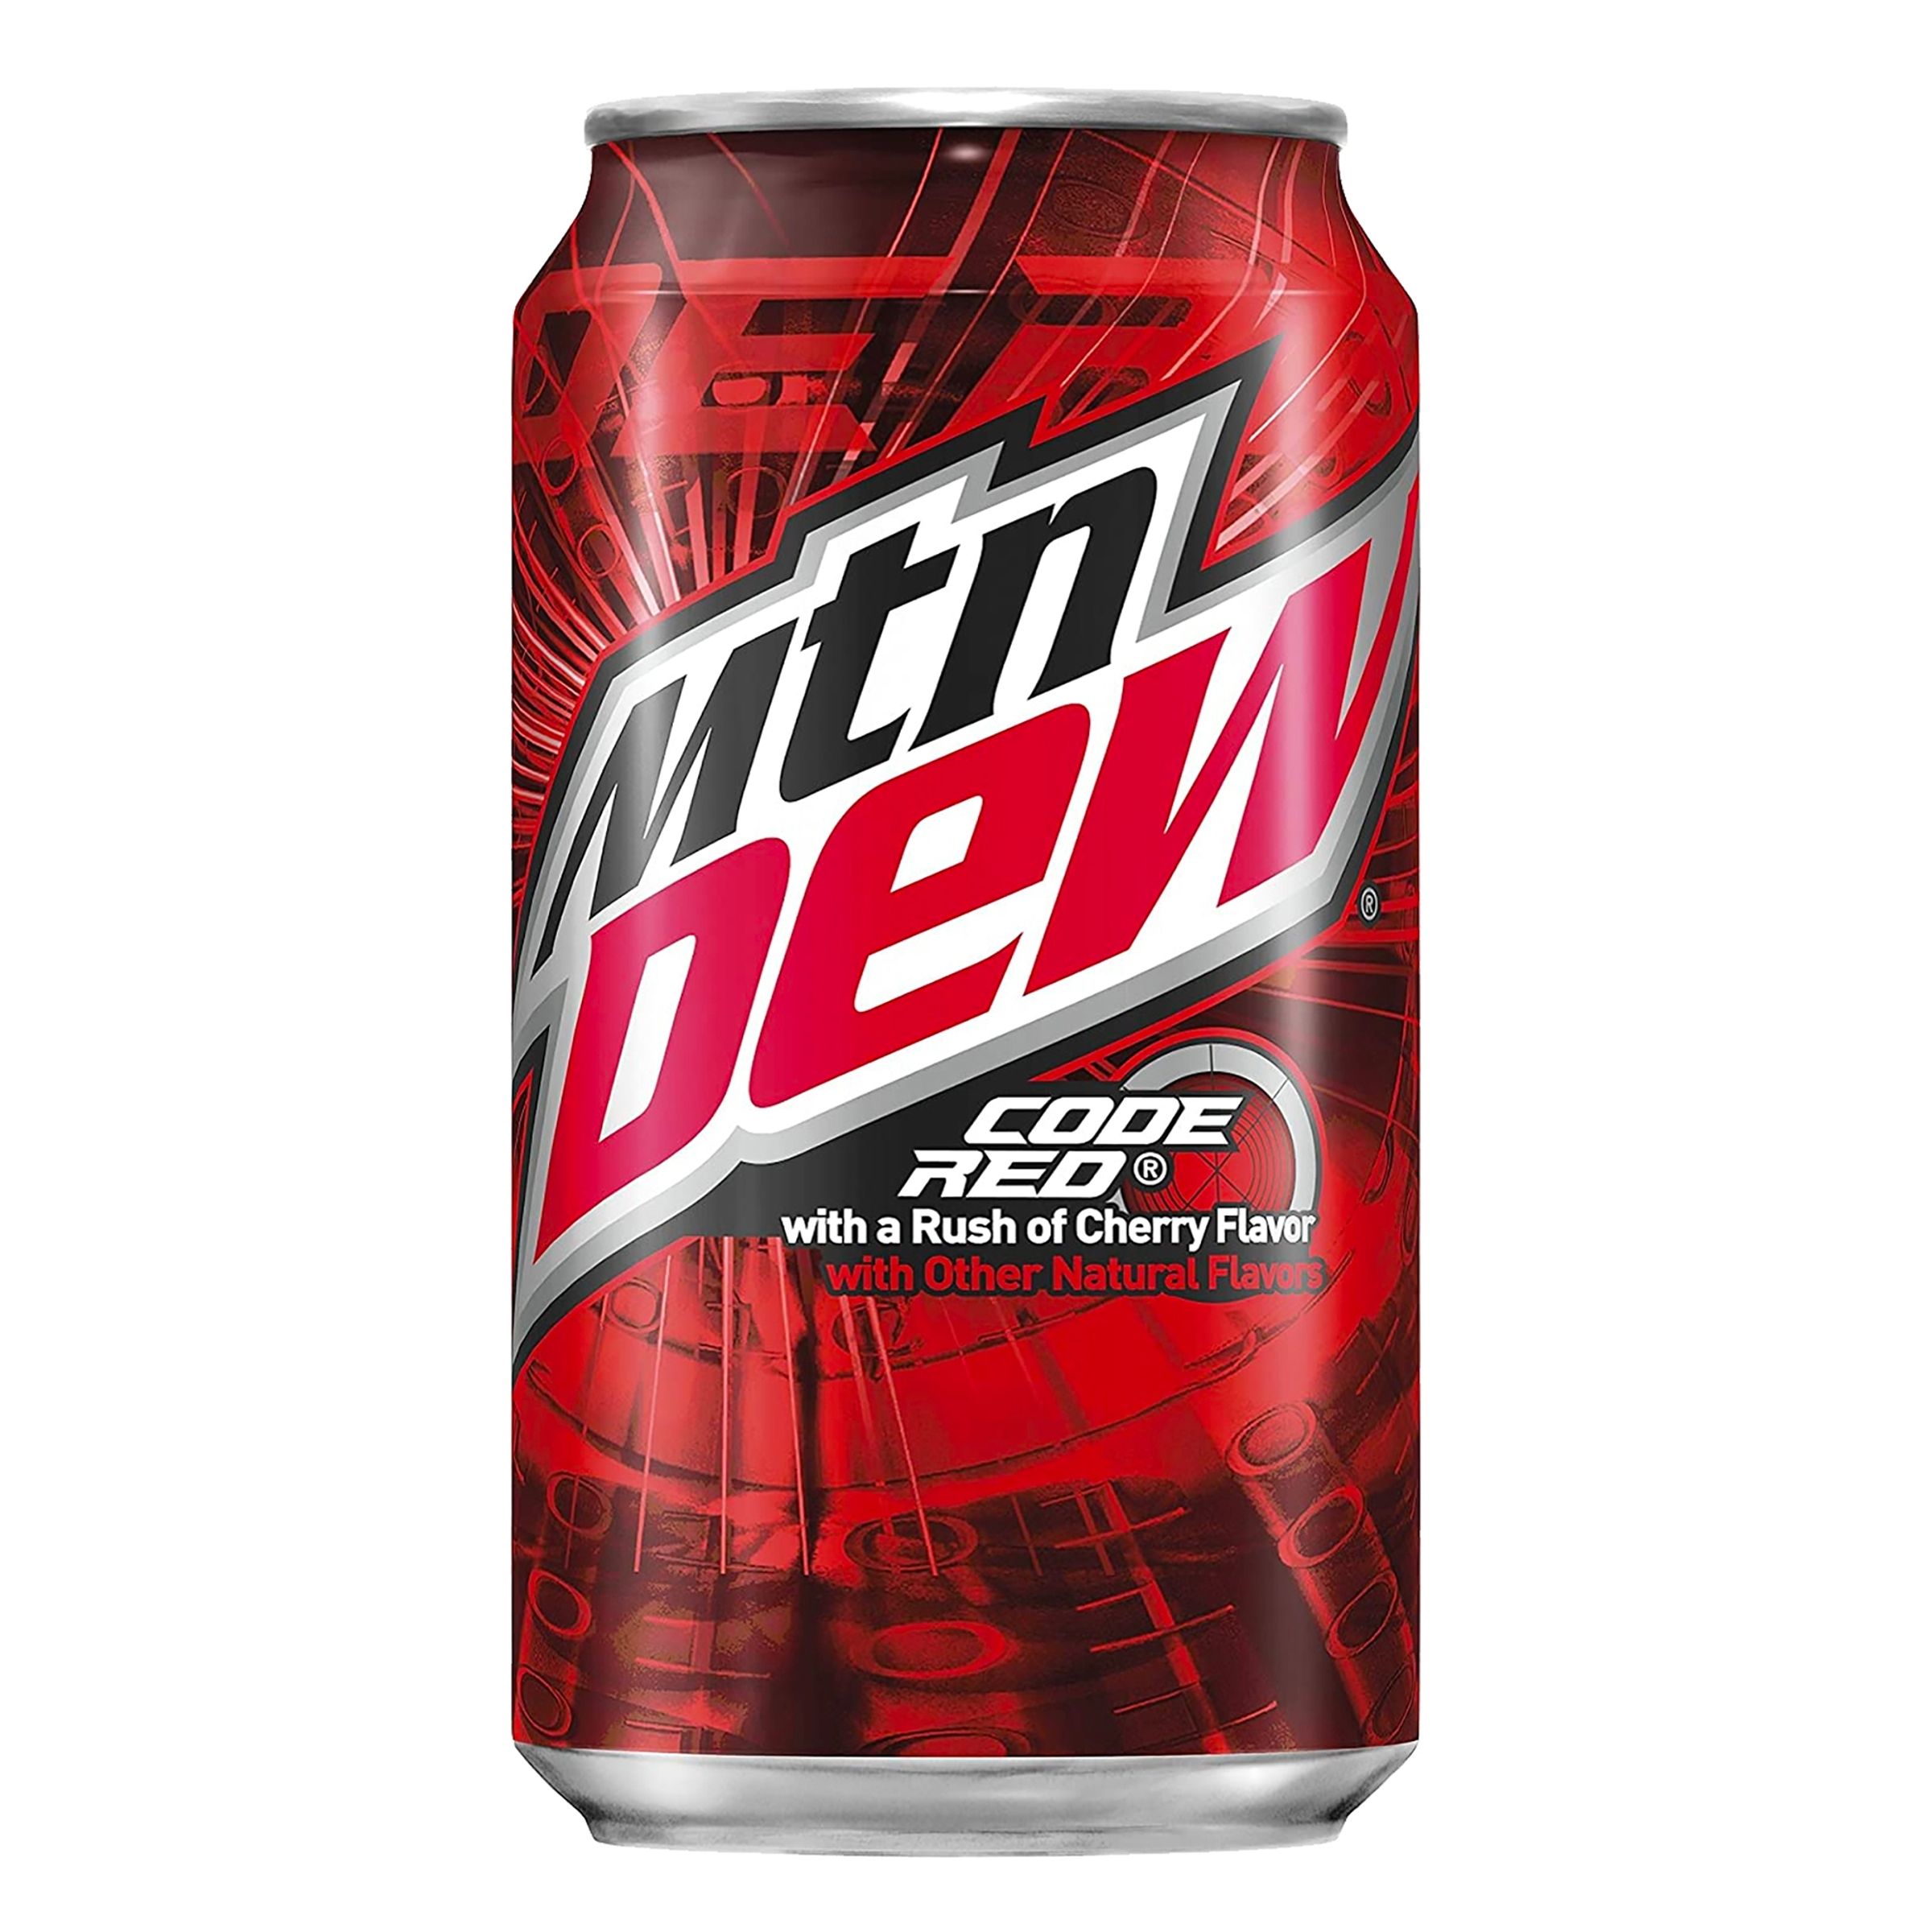 Mountain Dew Code Red - 1 st